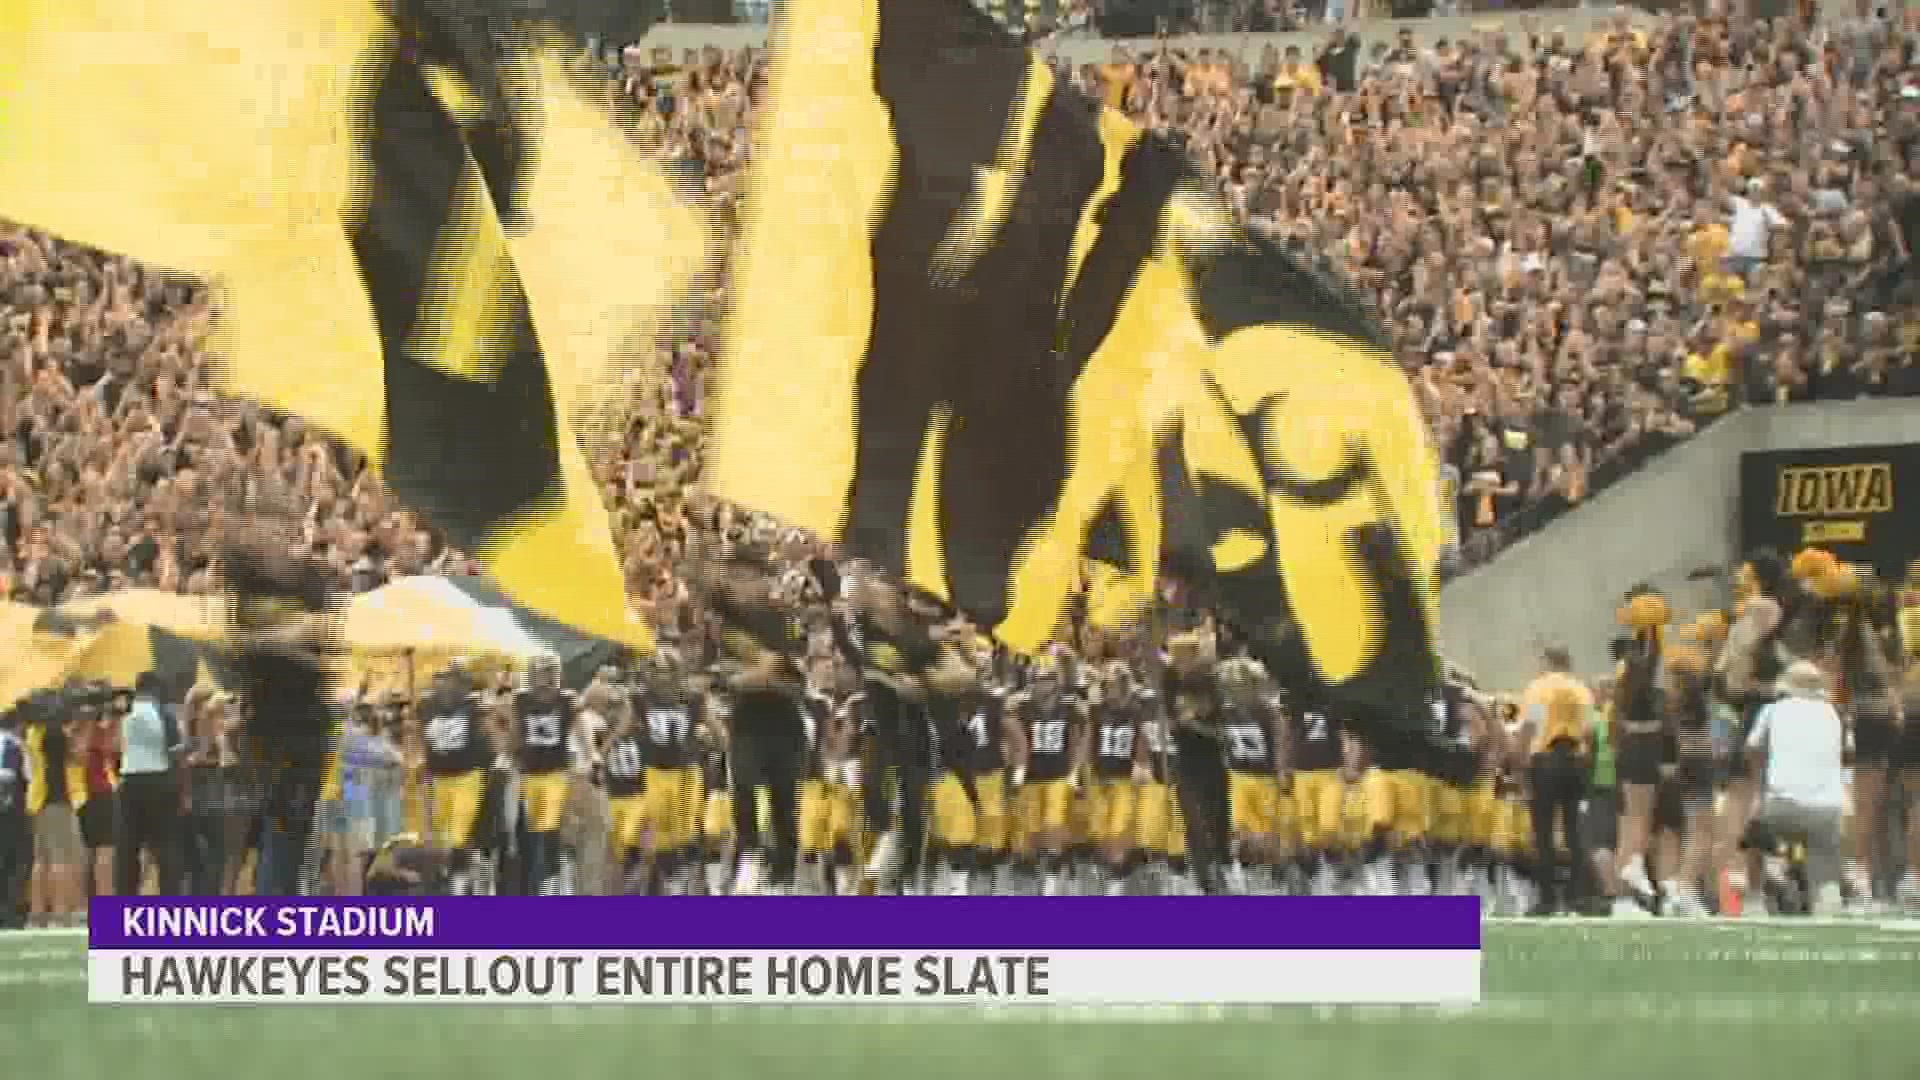 Iowa football fans looking to make it to a home game are now out of luck as the Hawkeyes revealed that they've sold out their entire home slate.